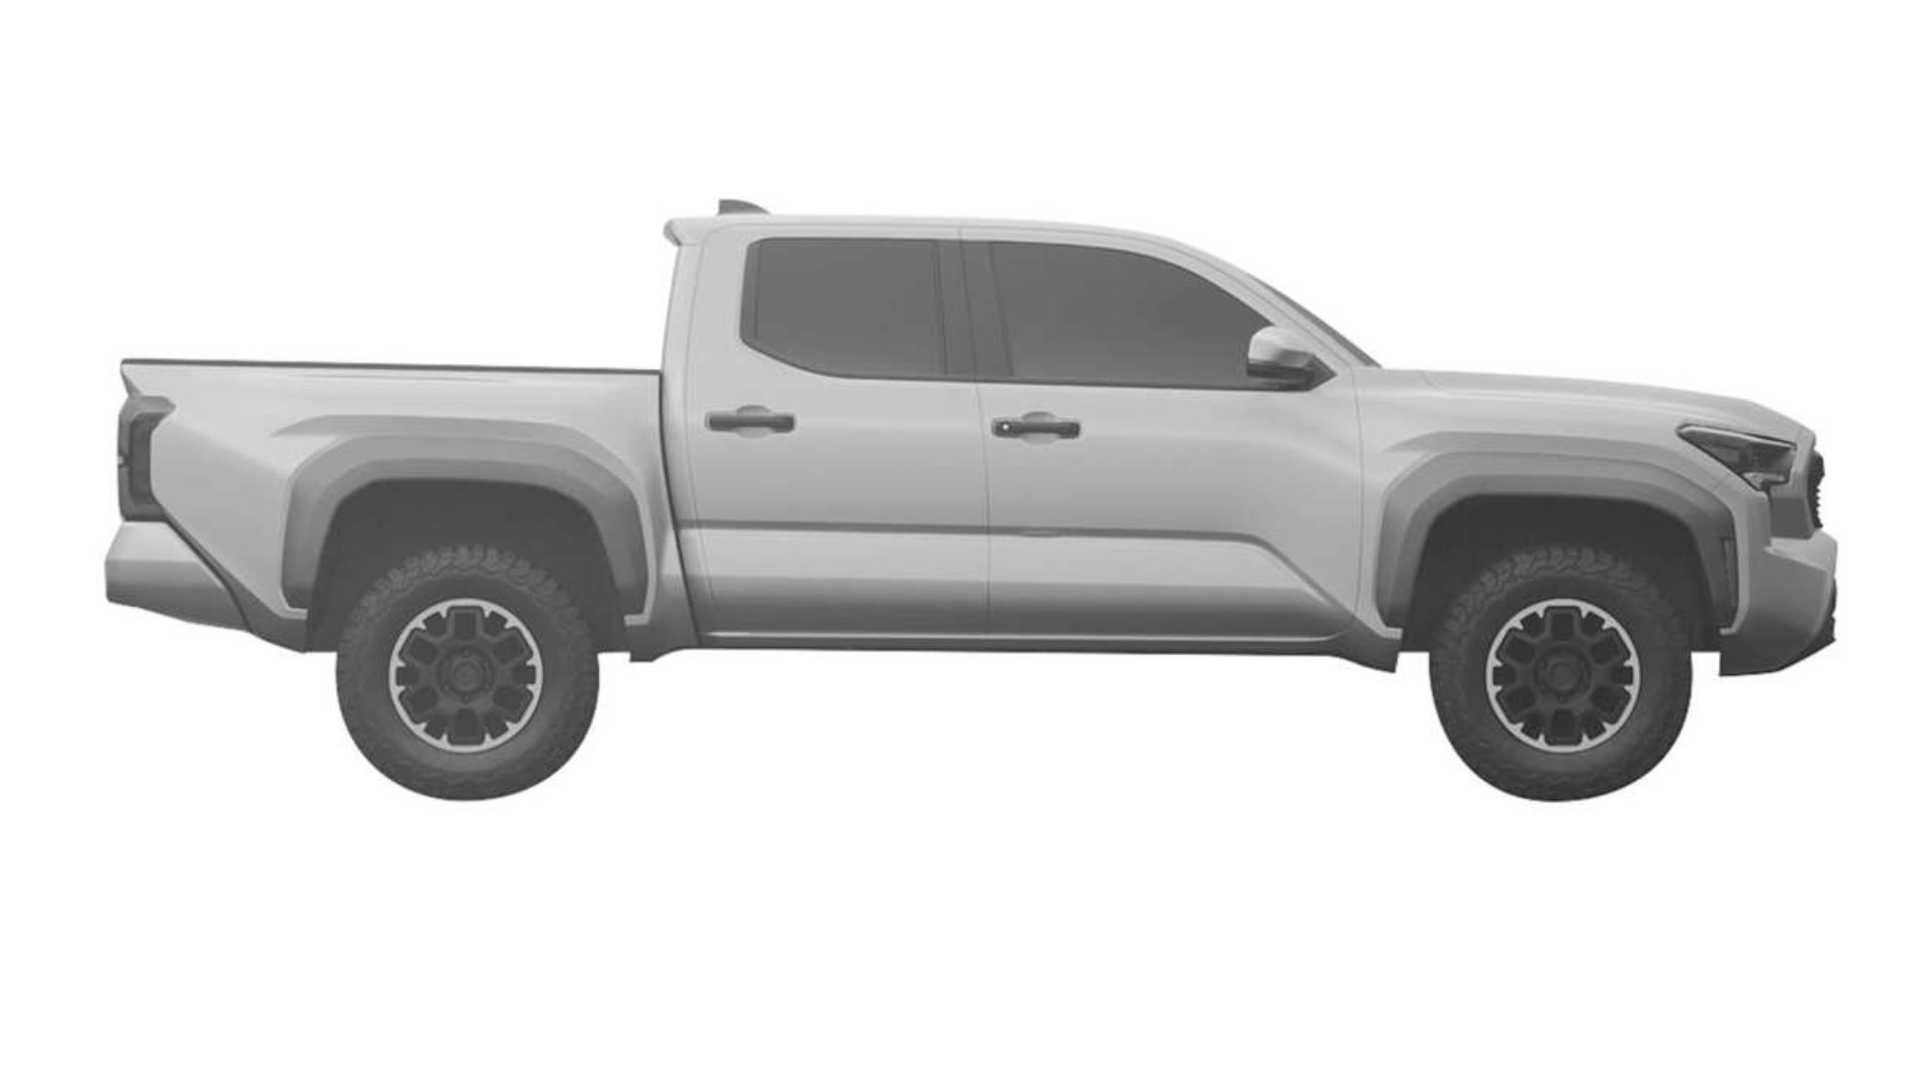 2024 Tacoma 2024 Tacoma Design Images Revealed in Patent! 📸 🕵🏻‍♂️ 2024 Toyota Tacoma 4th gen patent design 2